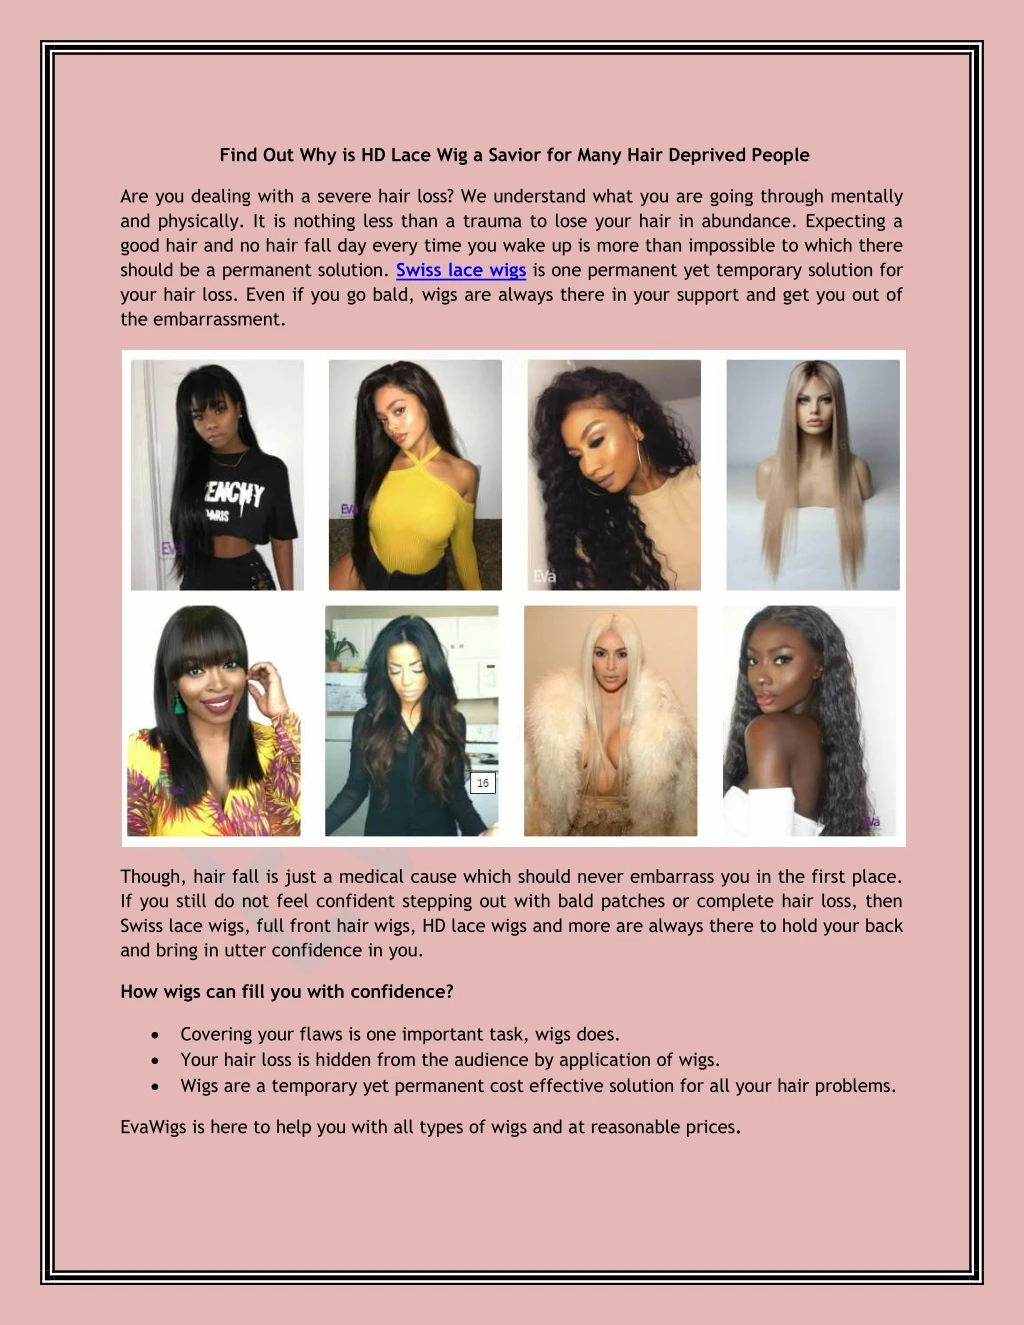 find out why is hd lace wig a savior for many